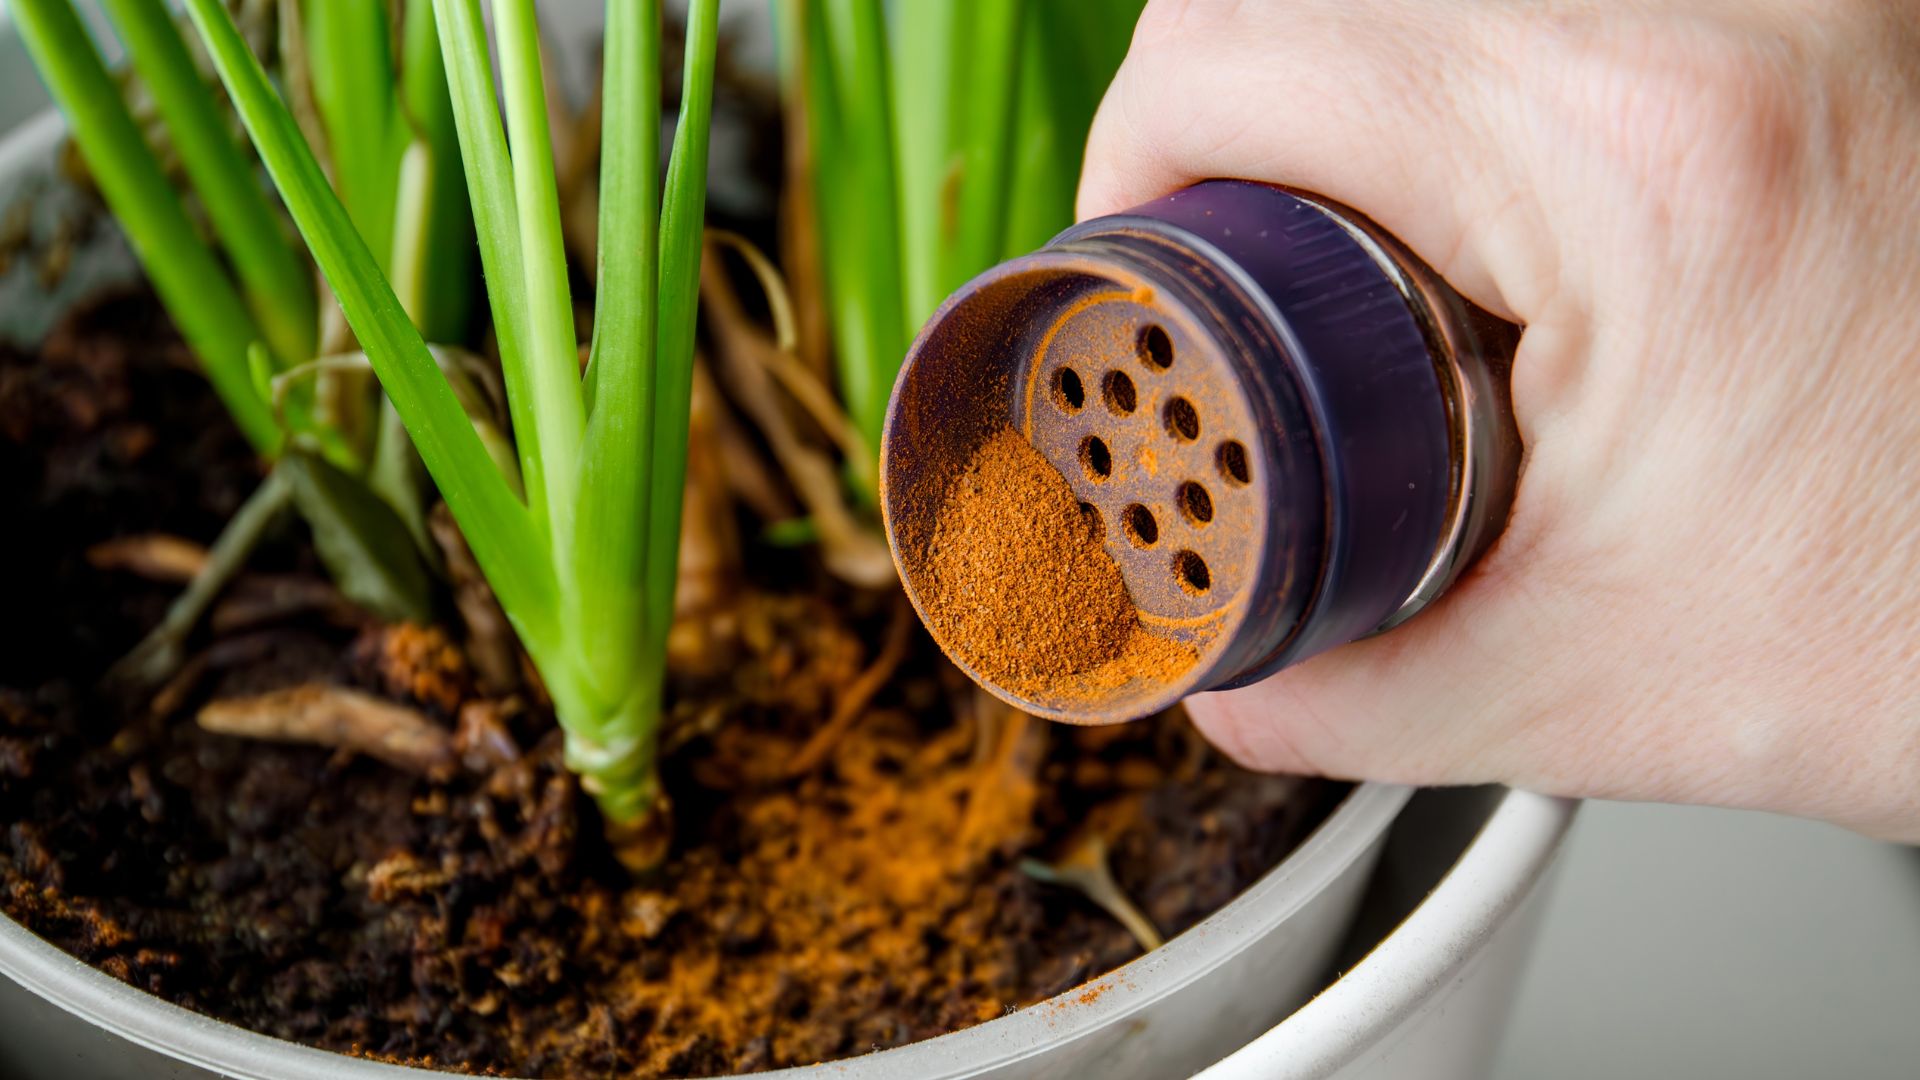 Does Cinnamon Hold The Key To A Mold-Free Oasis In Your Soil?